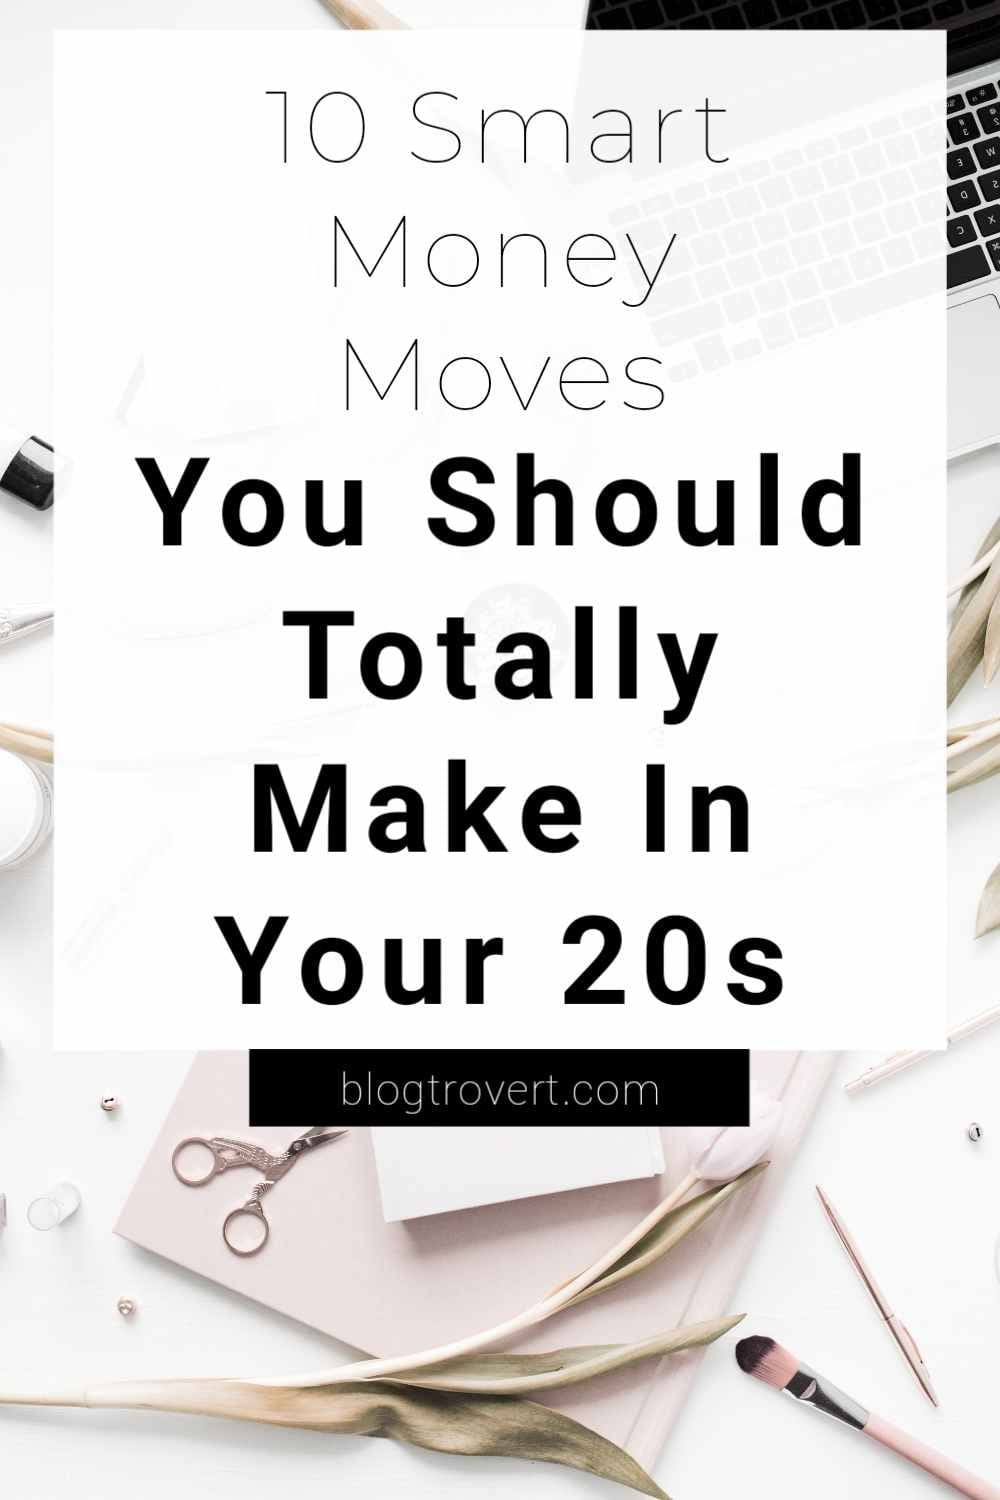 10 Smart Money Moves to Make in Your 20s for a better future 5